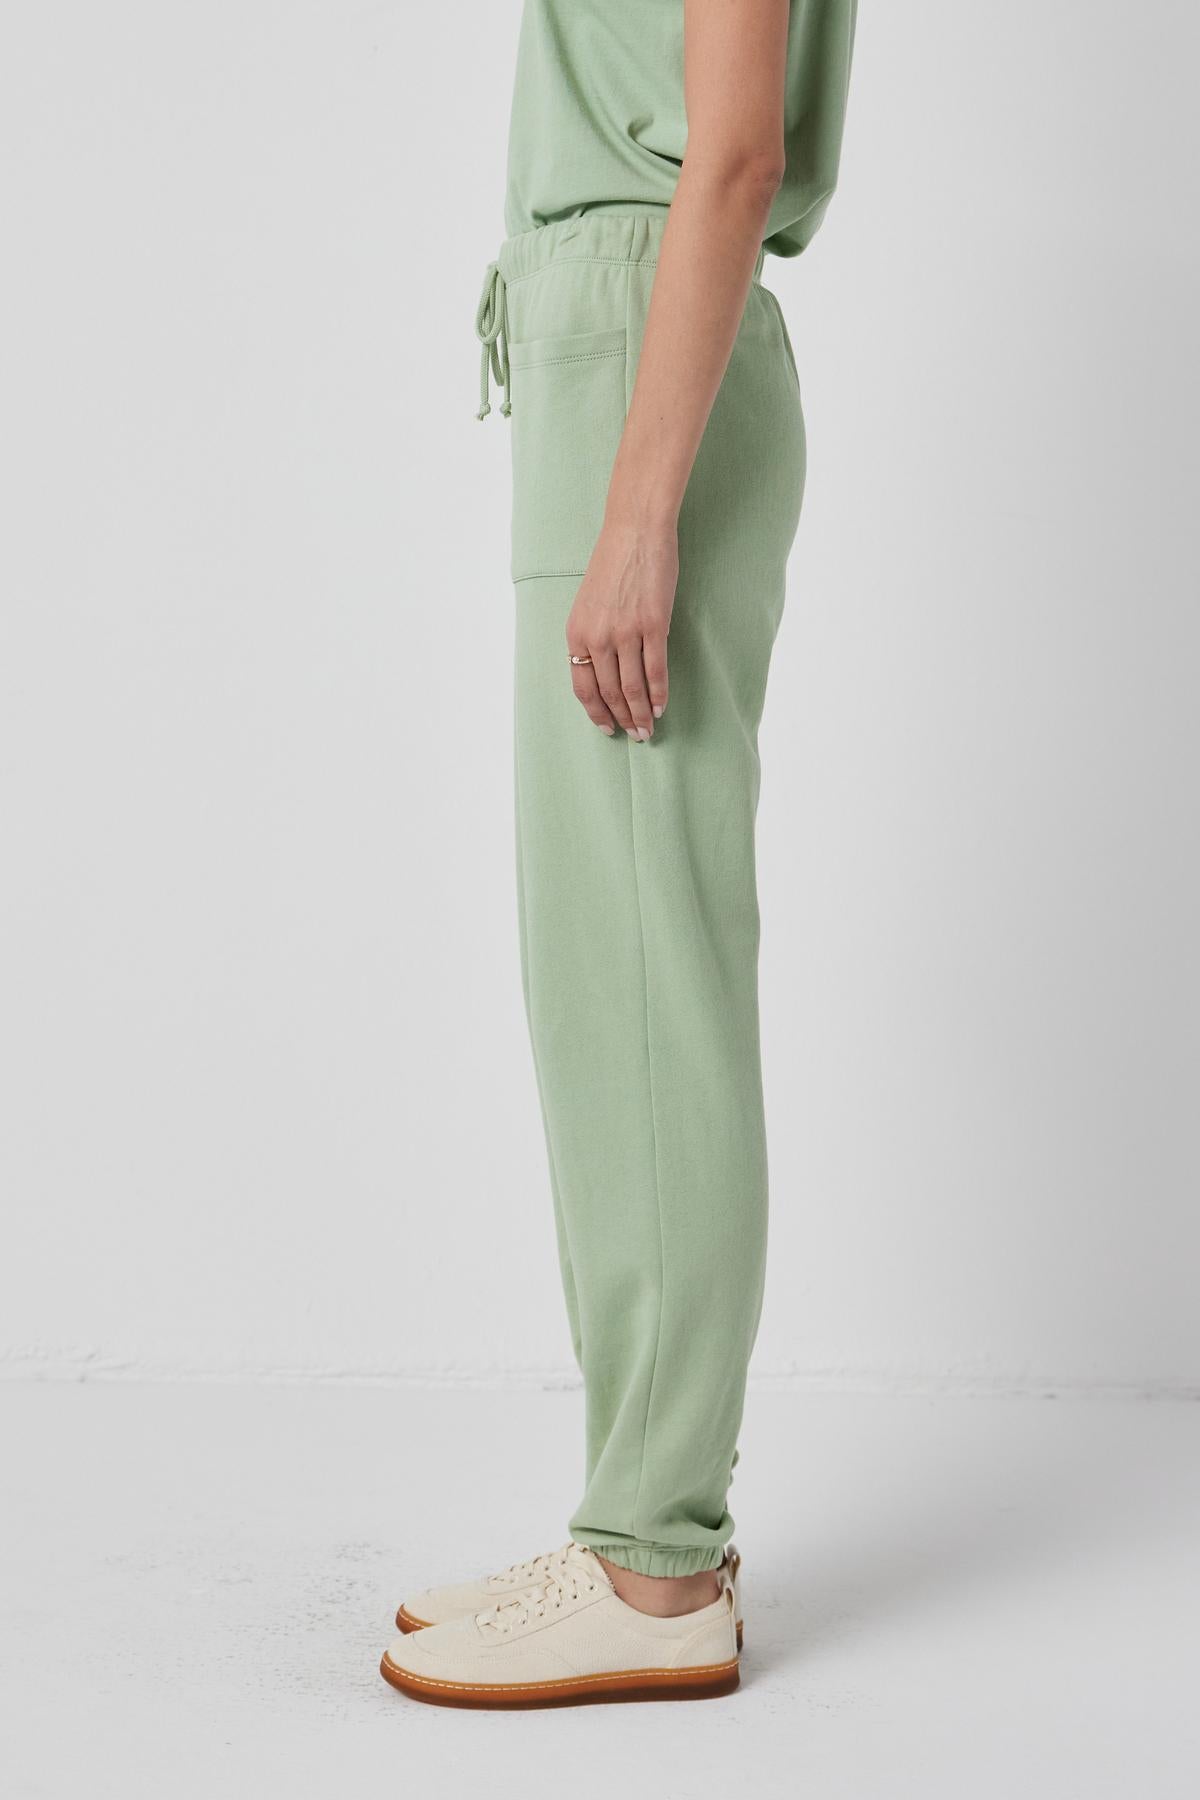 The model is wearing a green Westlake Sweatpant and a white tee by Velvet by Jenny Graham.-36168729624769